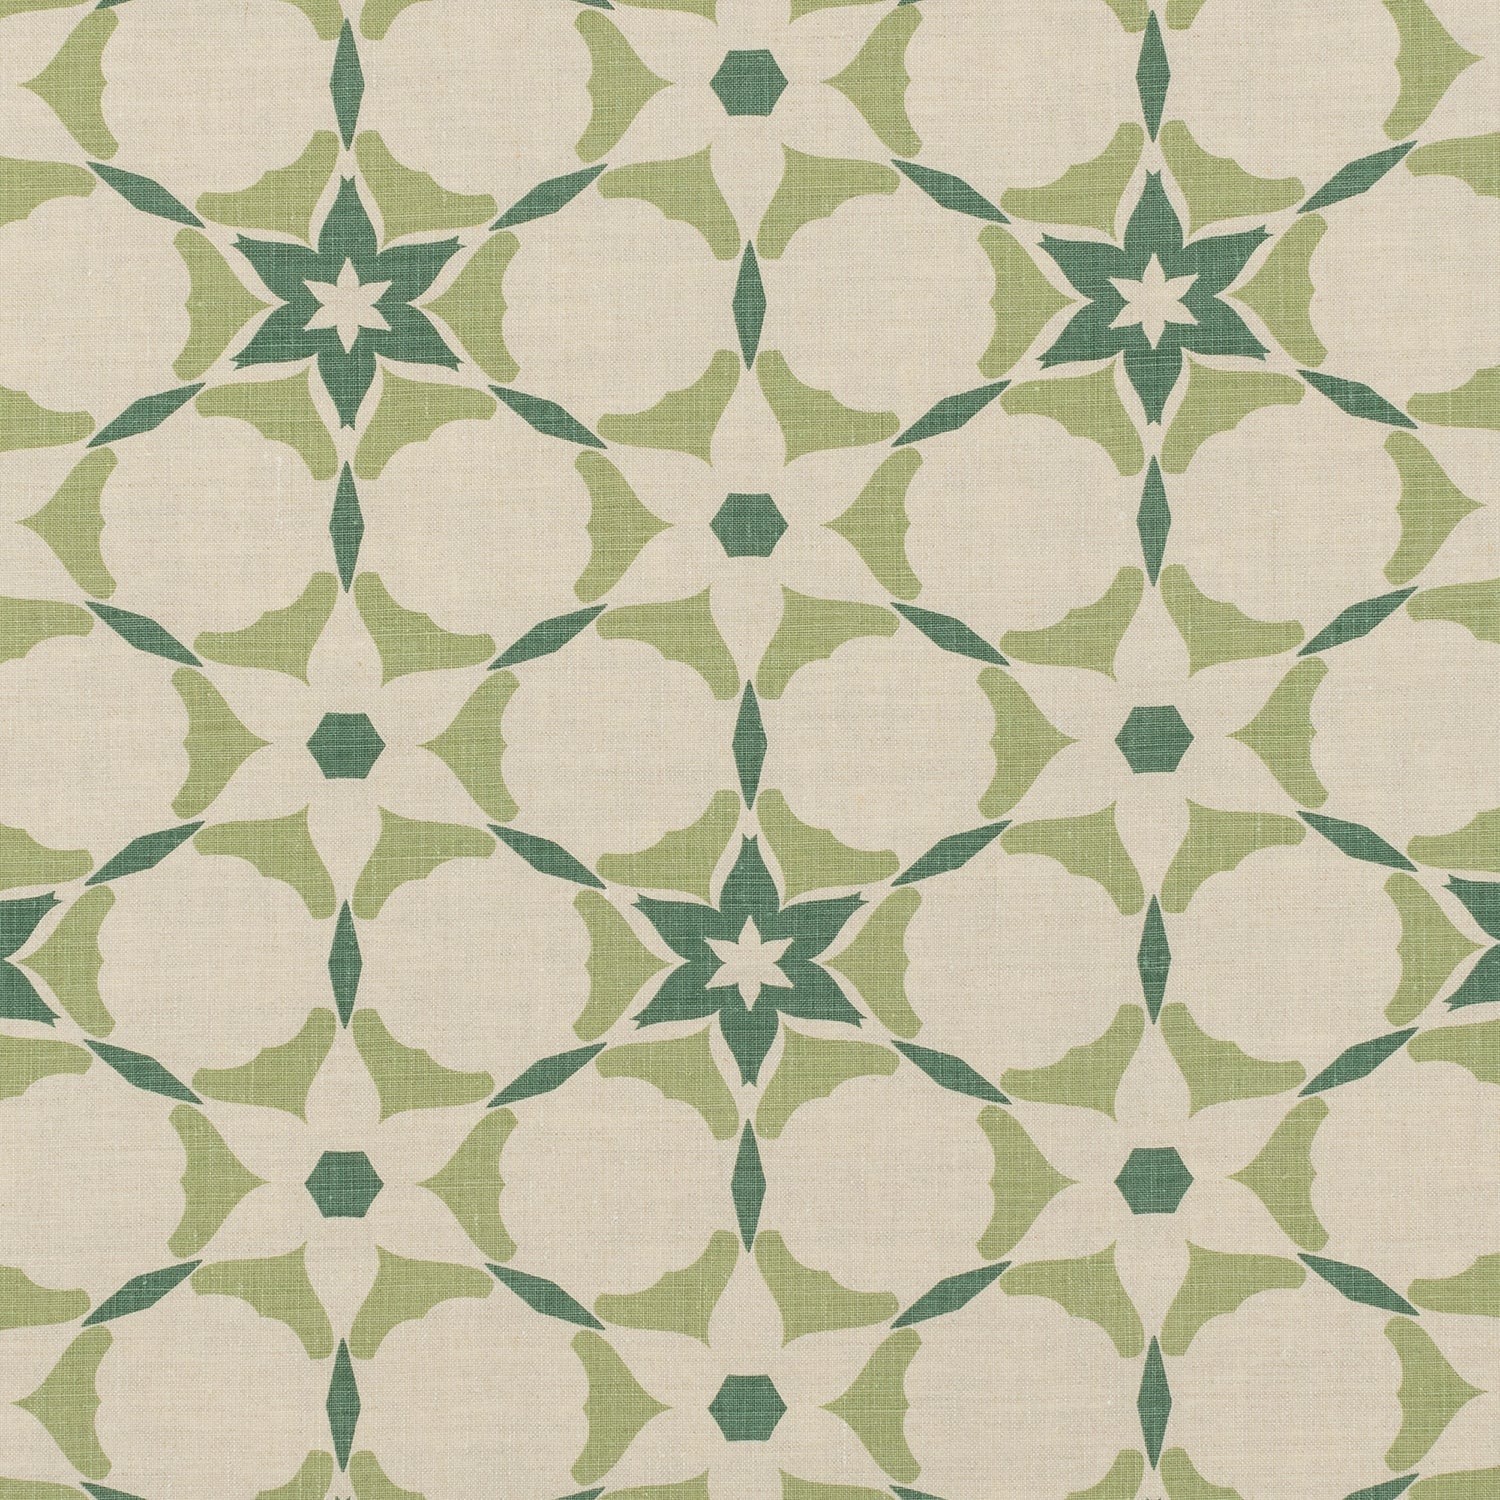 Detail of fabric in a geometric star print in shades of green on a tan field.